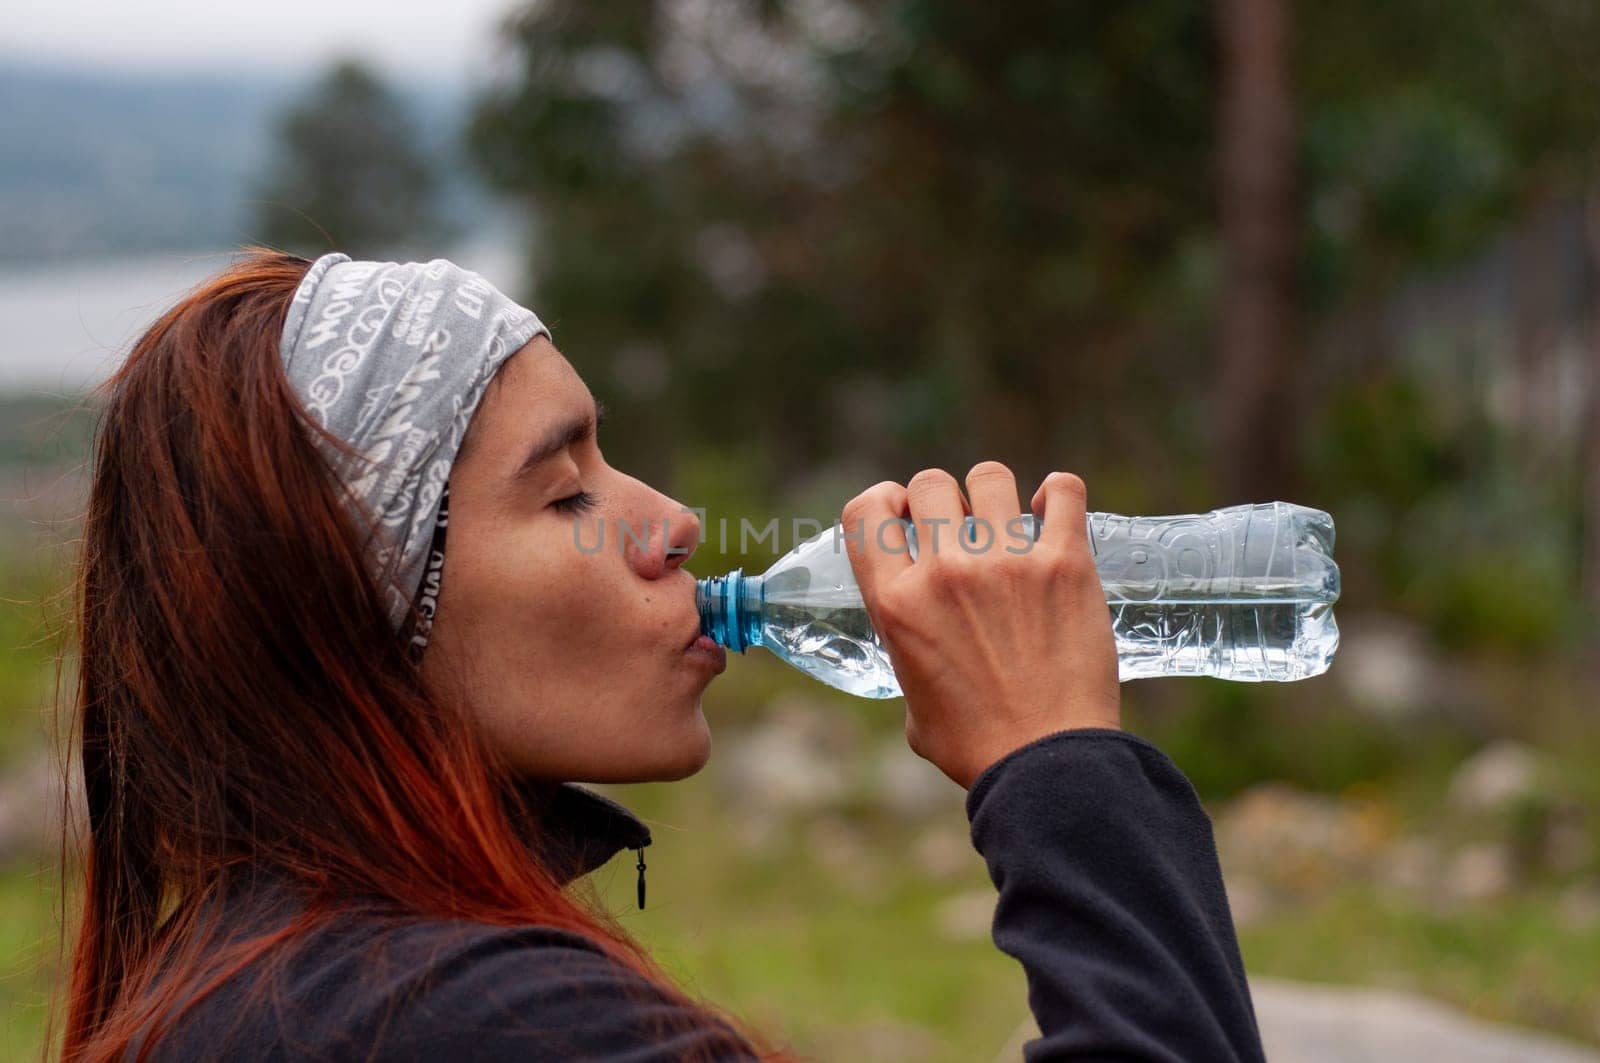 FIRST shot of sporty girl in the mountains drinking a bottle of water. High quality photo